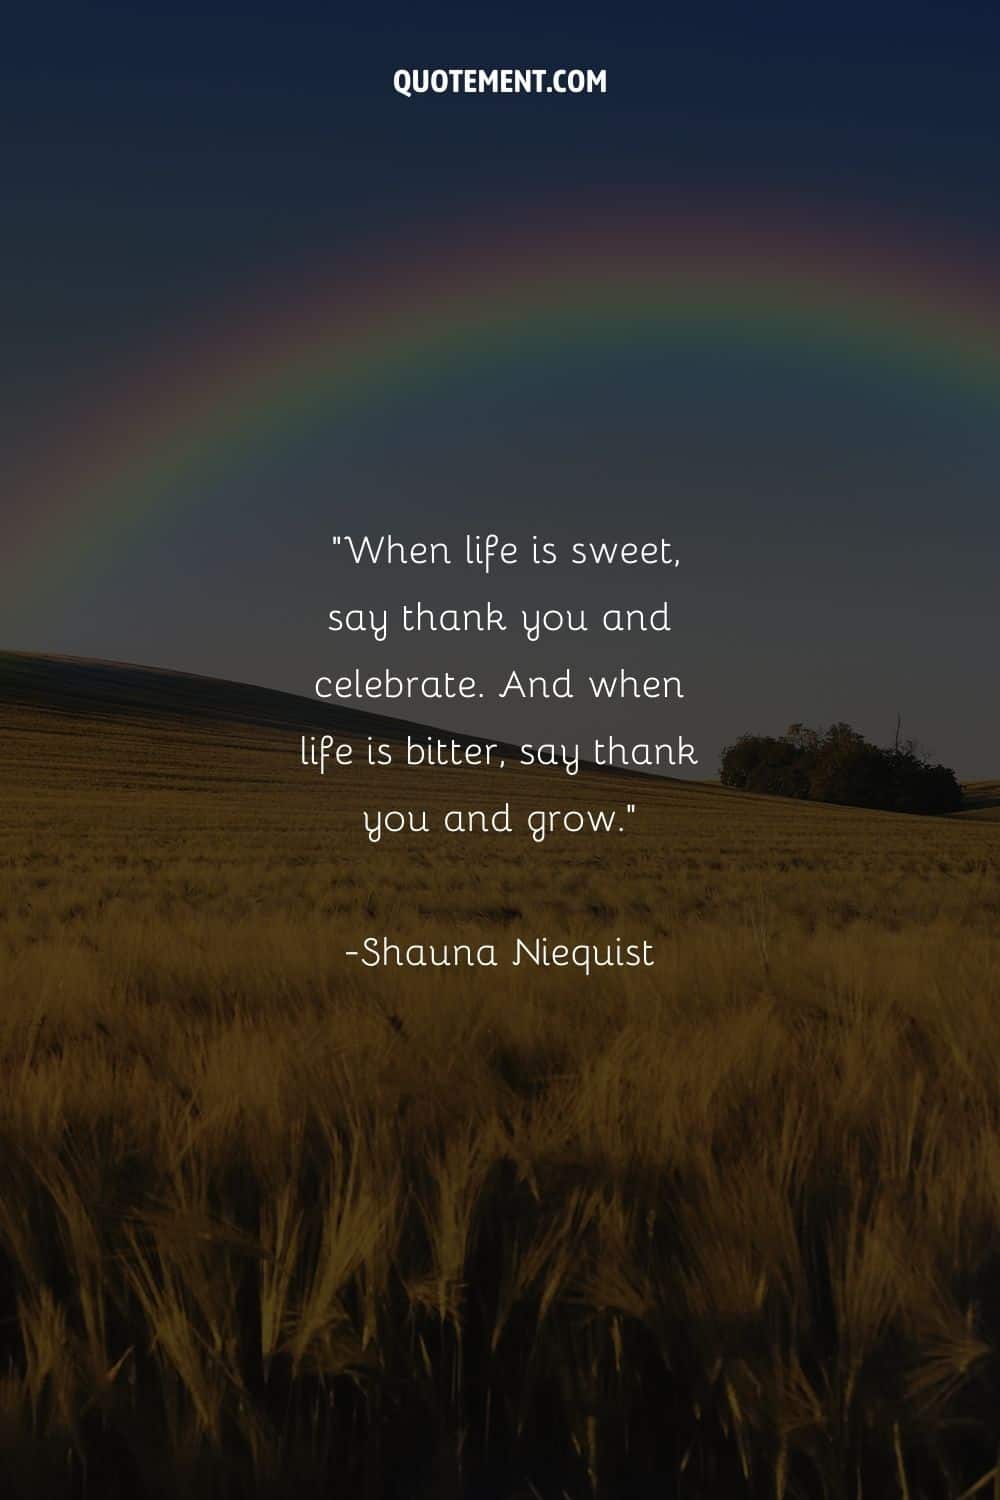 image of a rainbow above a grain field representing cute life quote